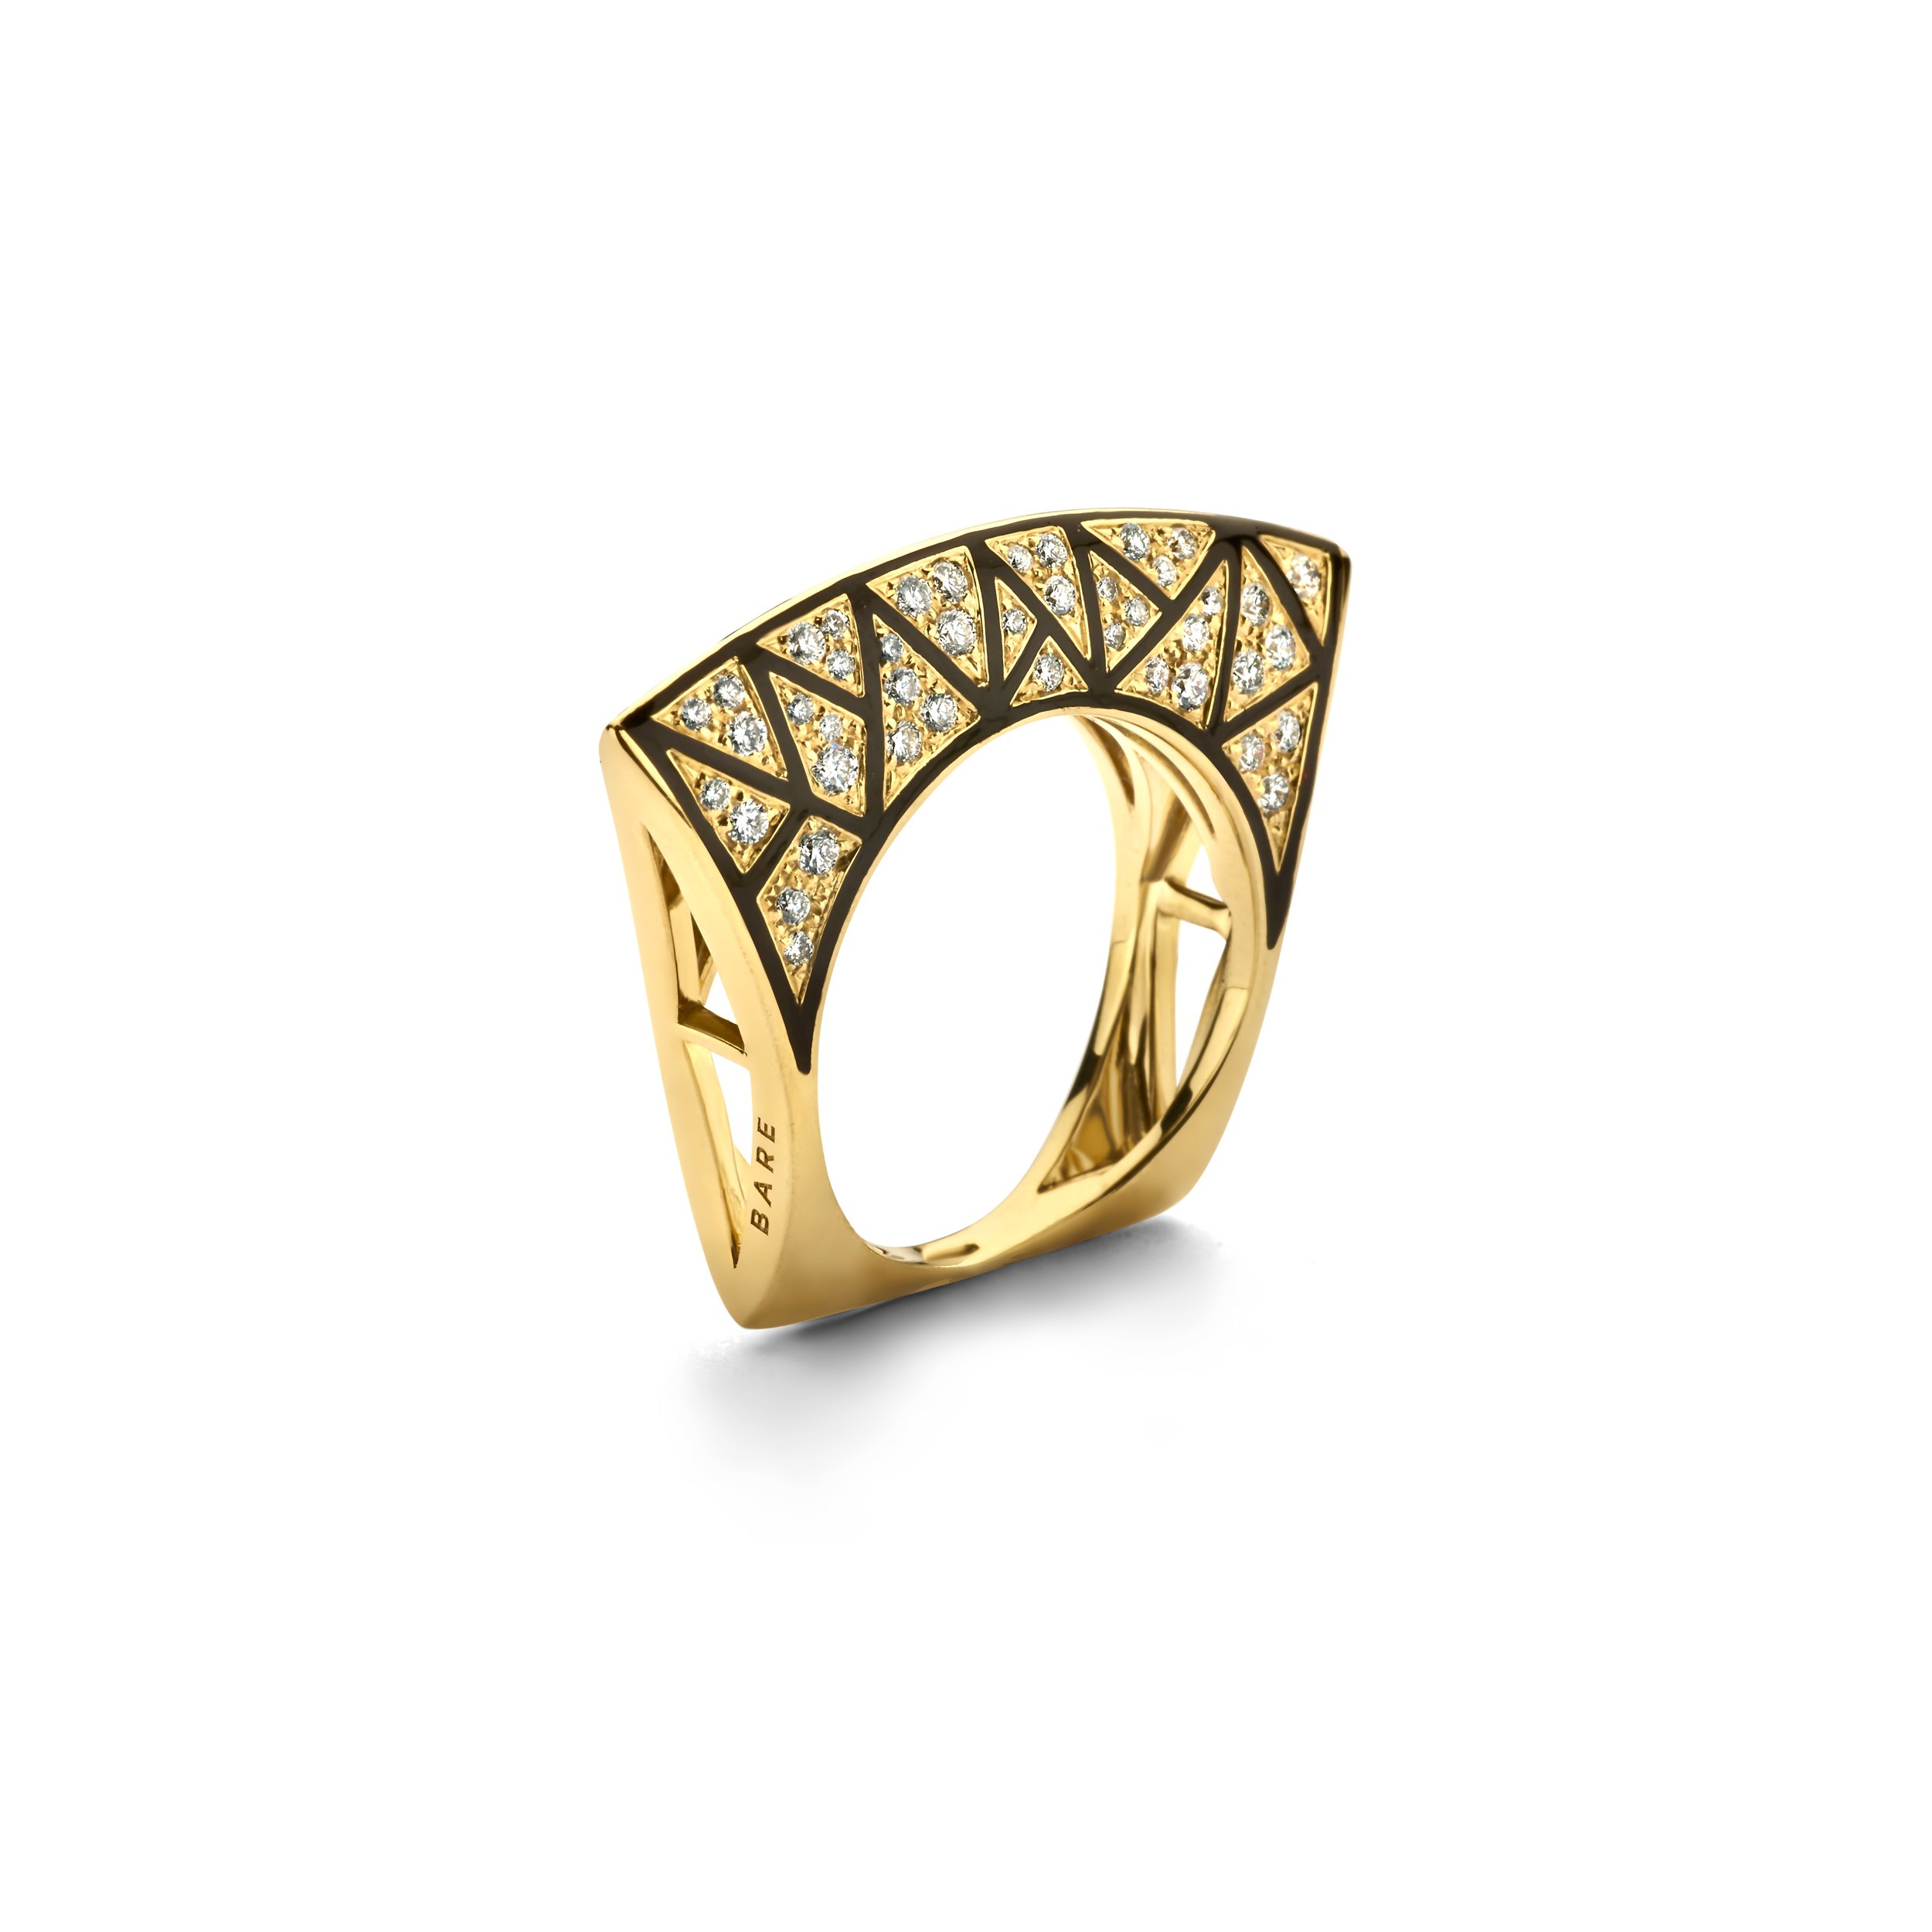 Sabbia Fine Jewelry - The Enameled Lotus Ring-yellow gold with